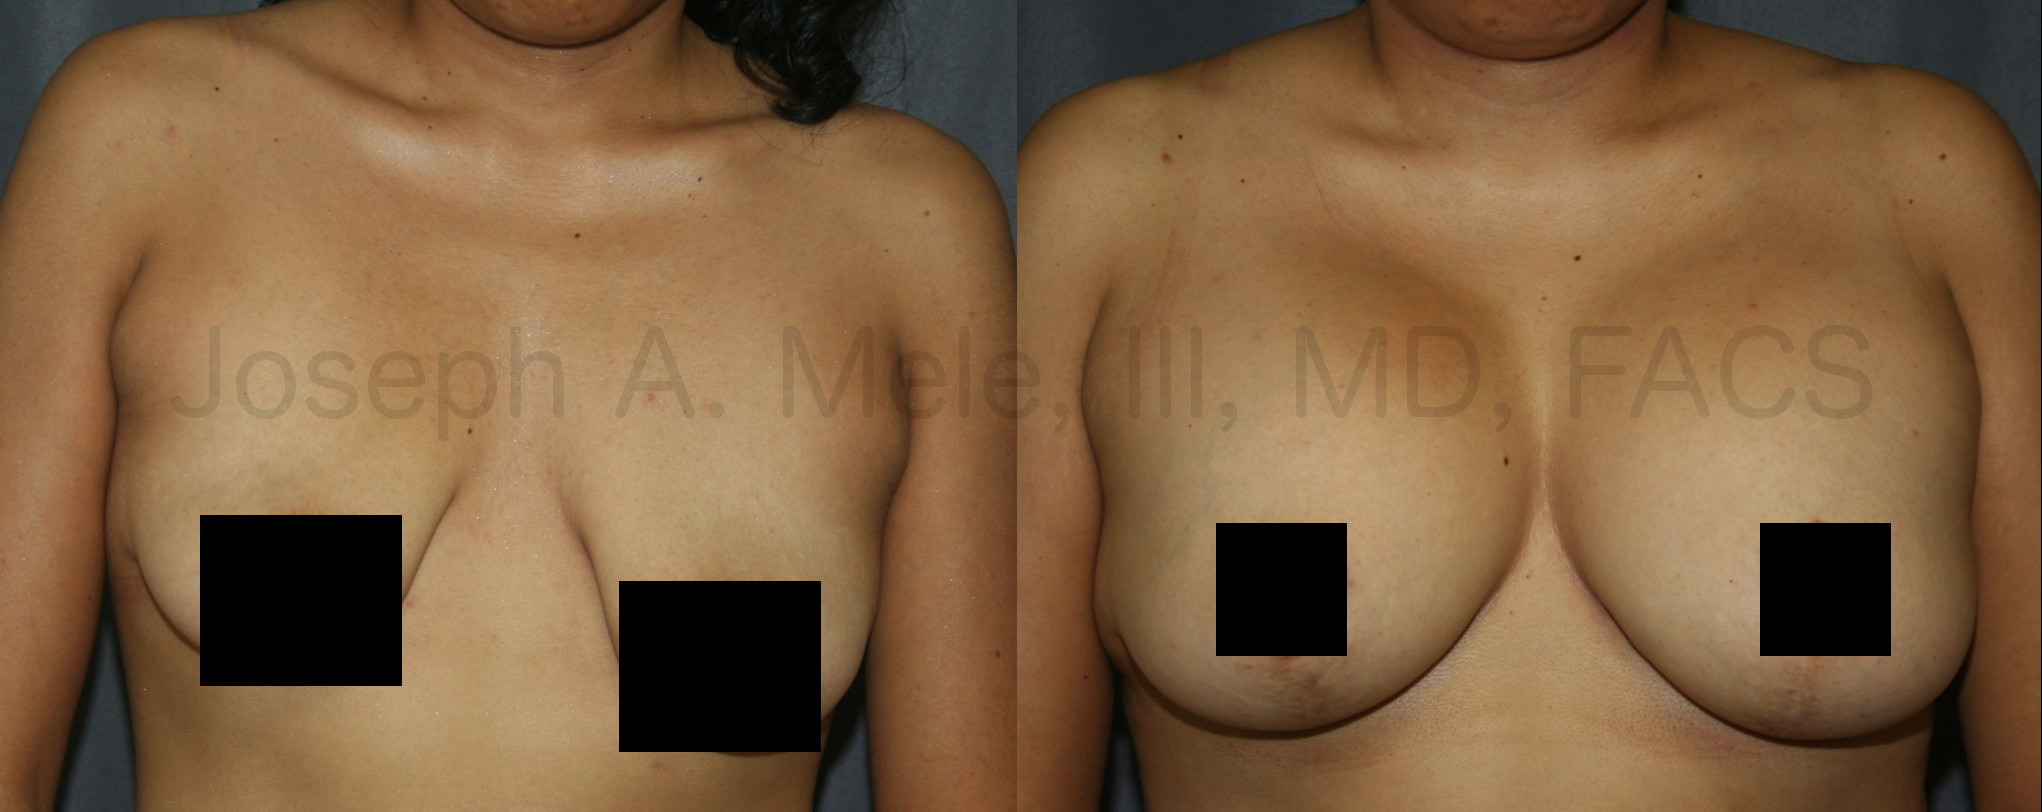 Breast Augmentation Breast Lift before and after pictures (mastopexy augmentation)